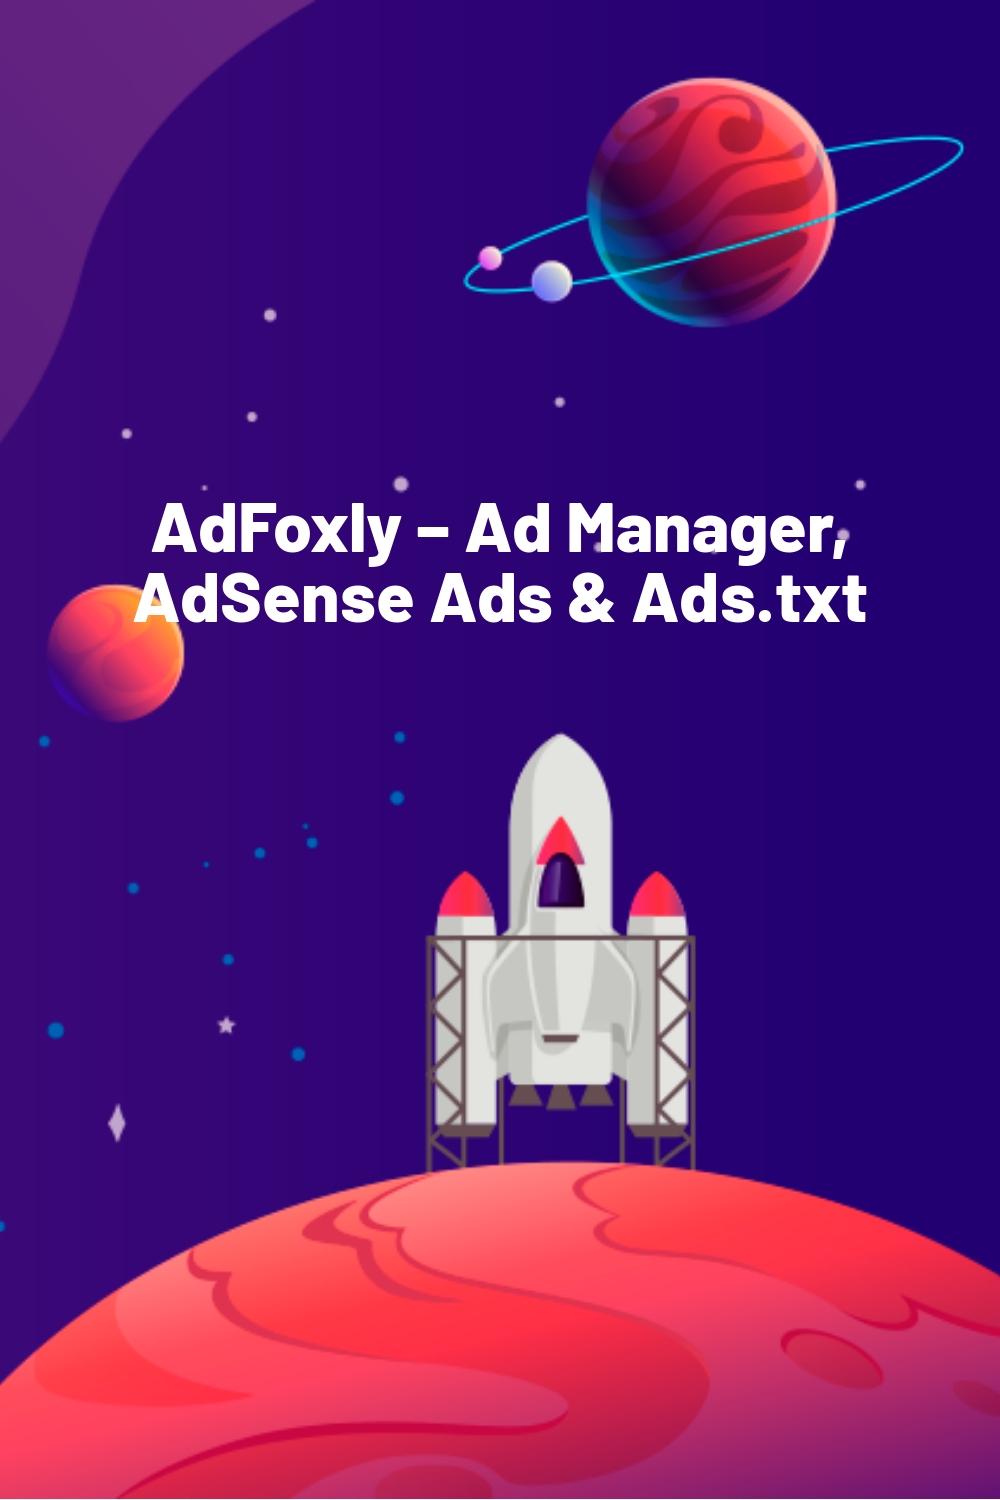 AdFoxly – Ad Manager, AdSense Ads & Ads.txt